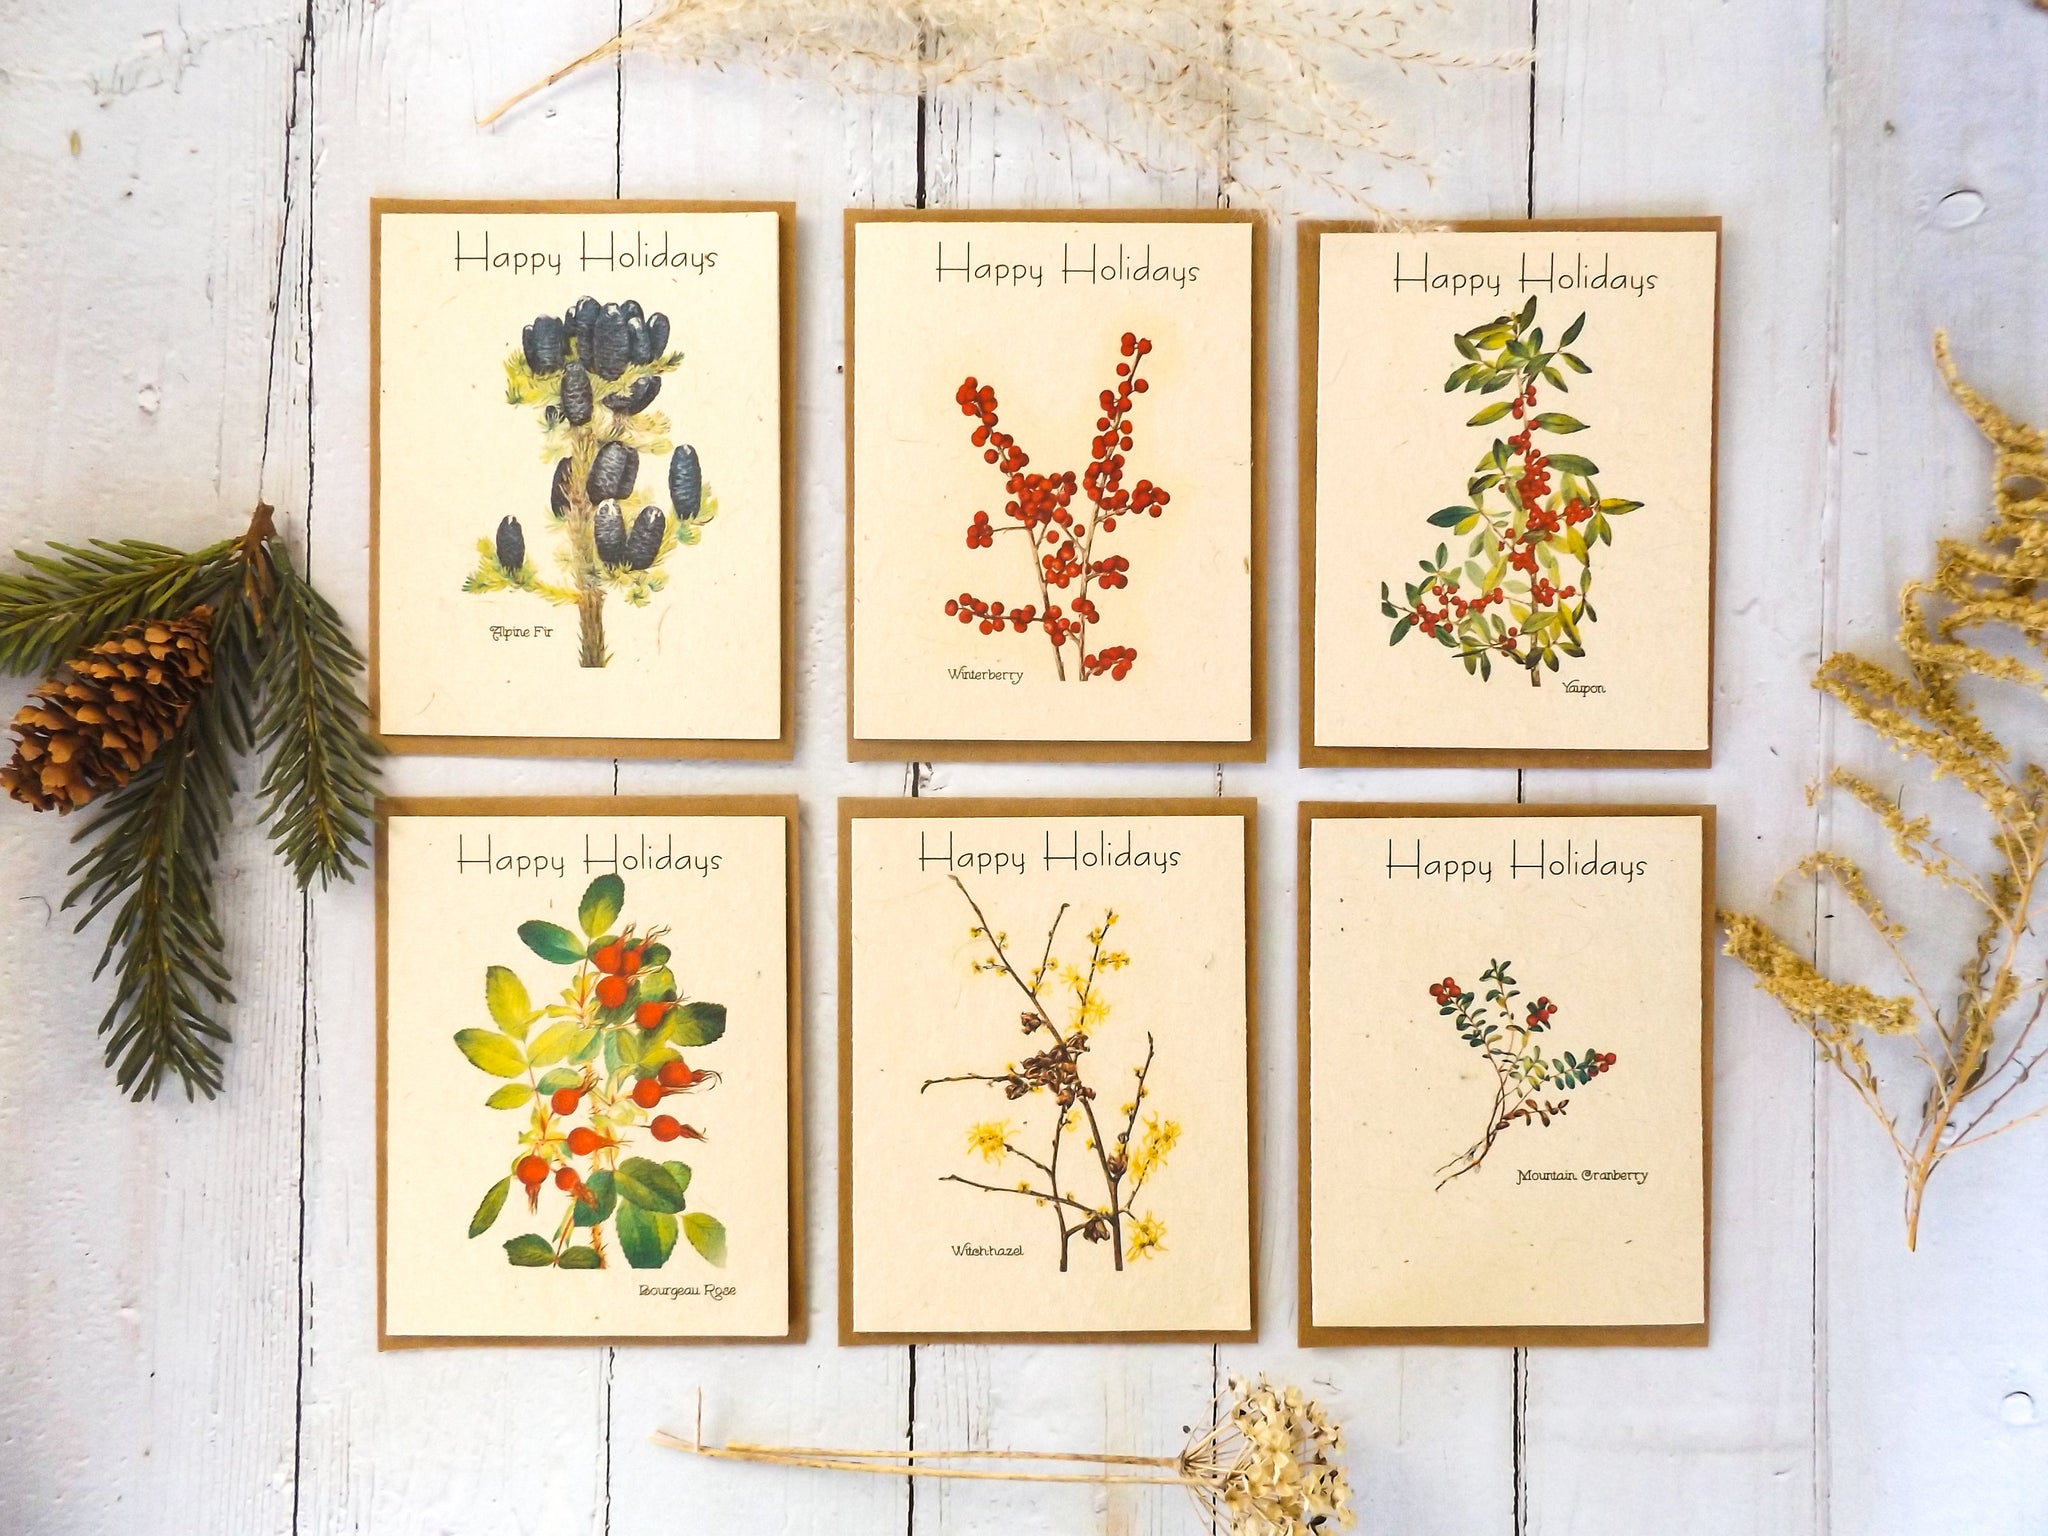 Plantable Seed Paper Holiday Gift Card Holders